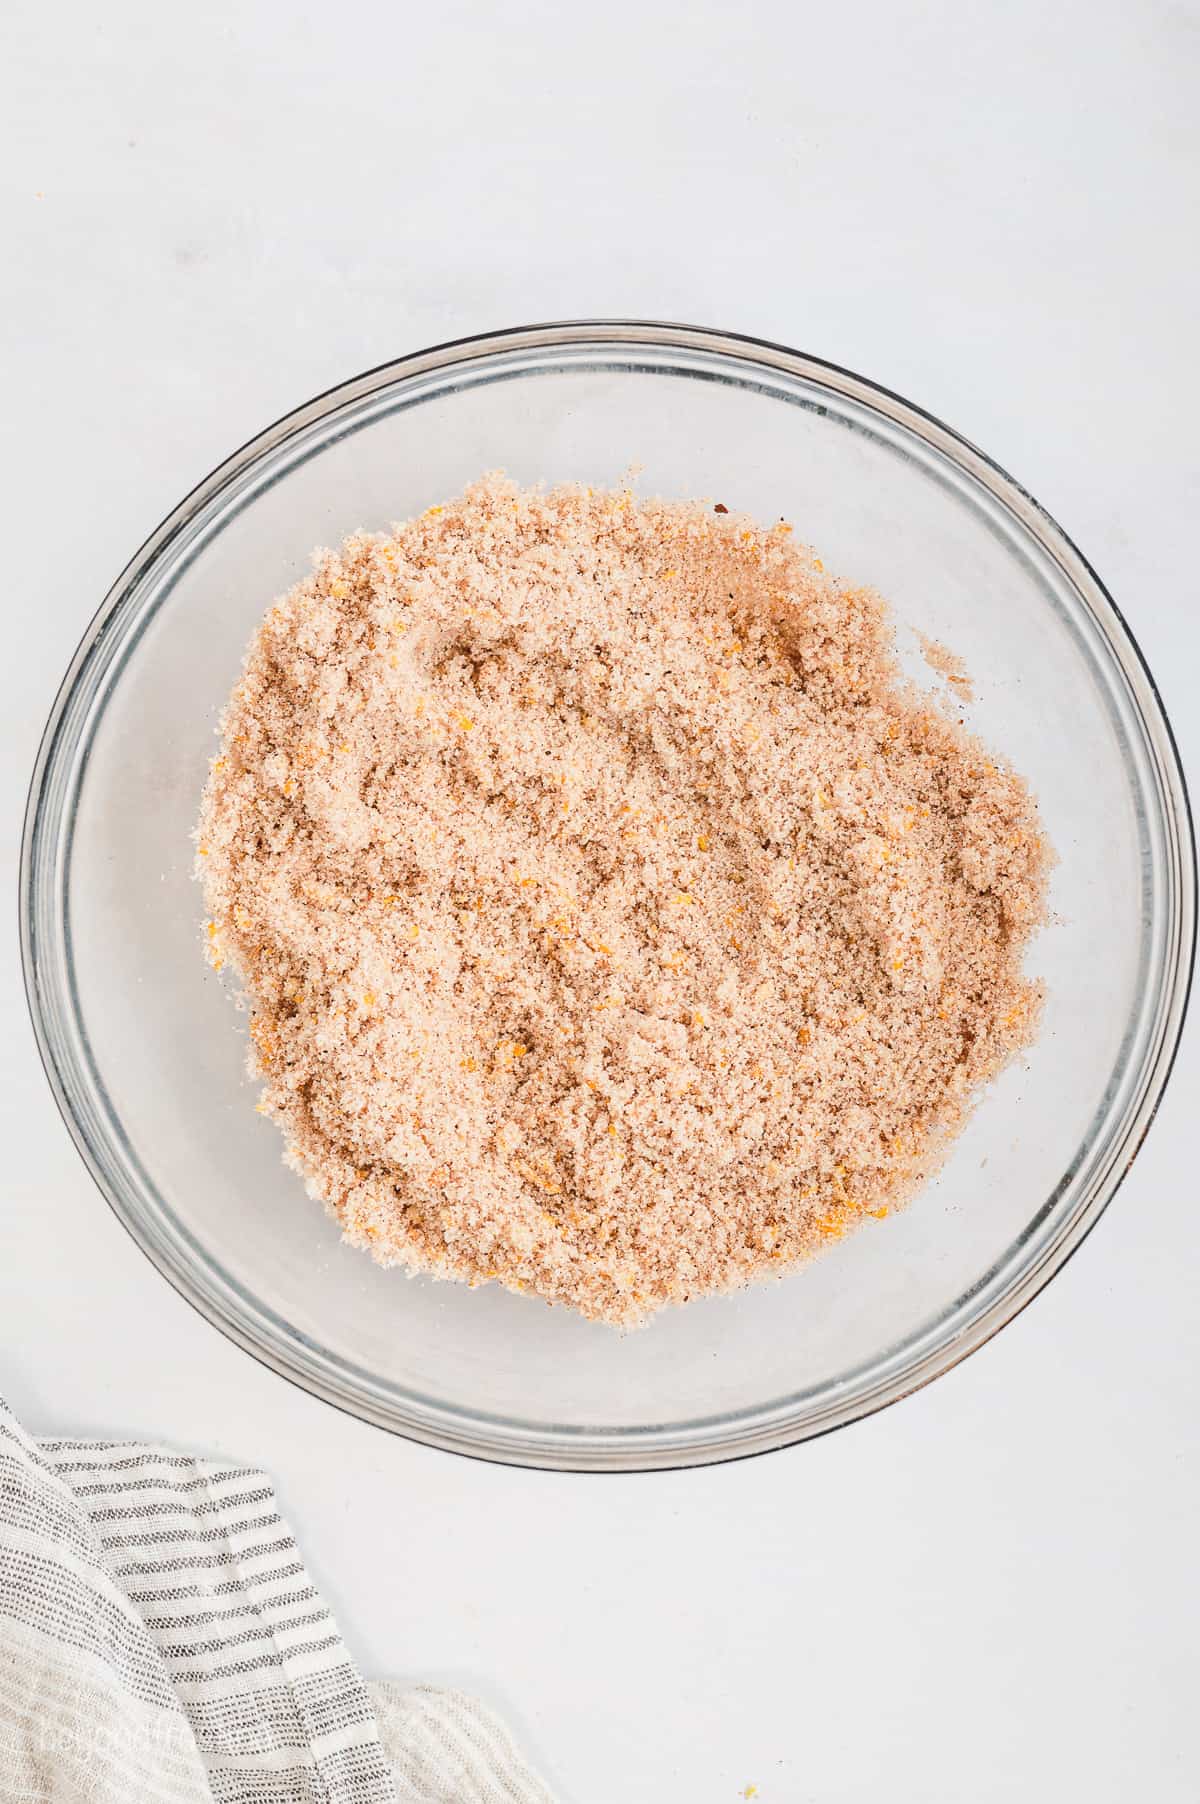 Orange zest and cinnamon sugar combined in a glass bowl.